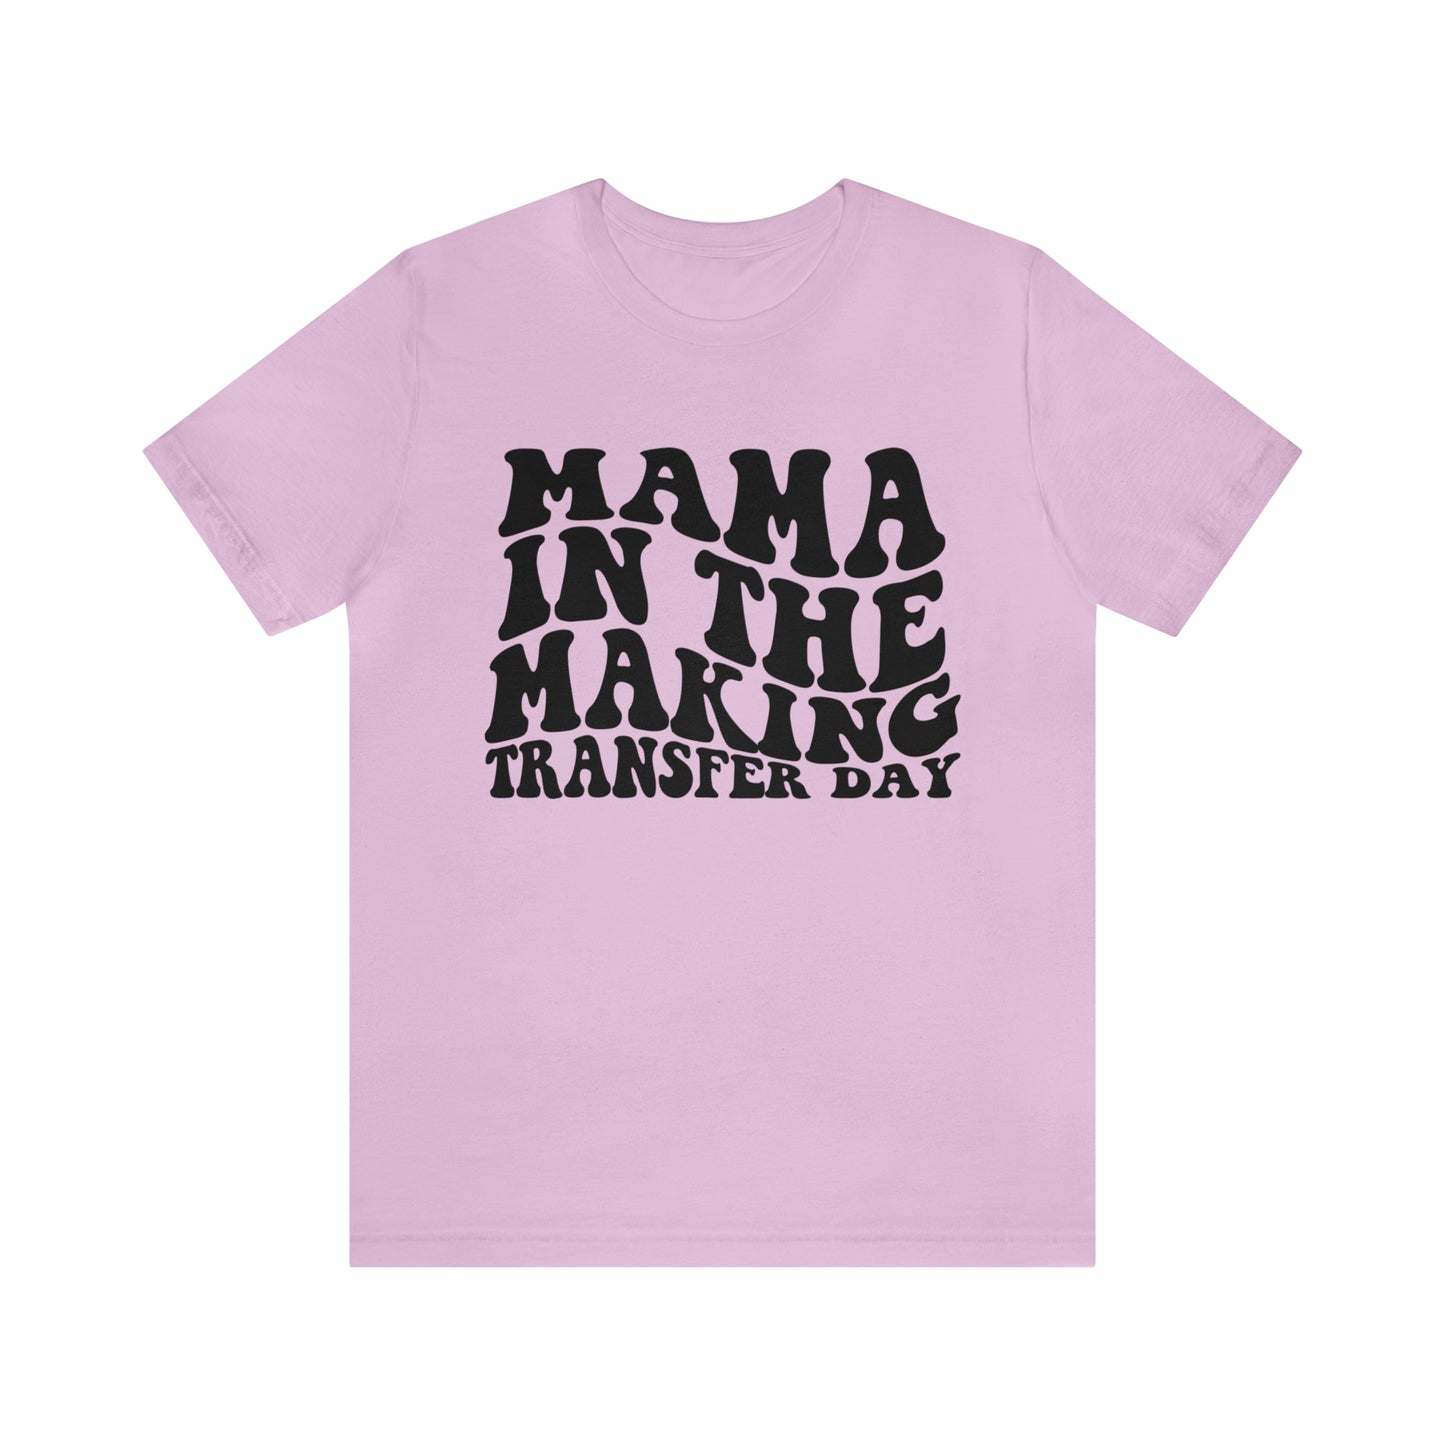 "Mama In The Making Transfer Day" Bella Canvas Unisex Short Sleeve Tee